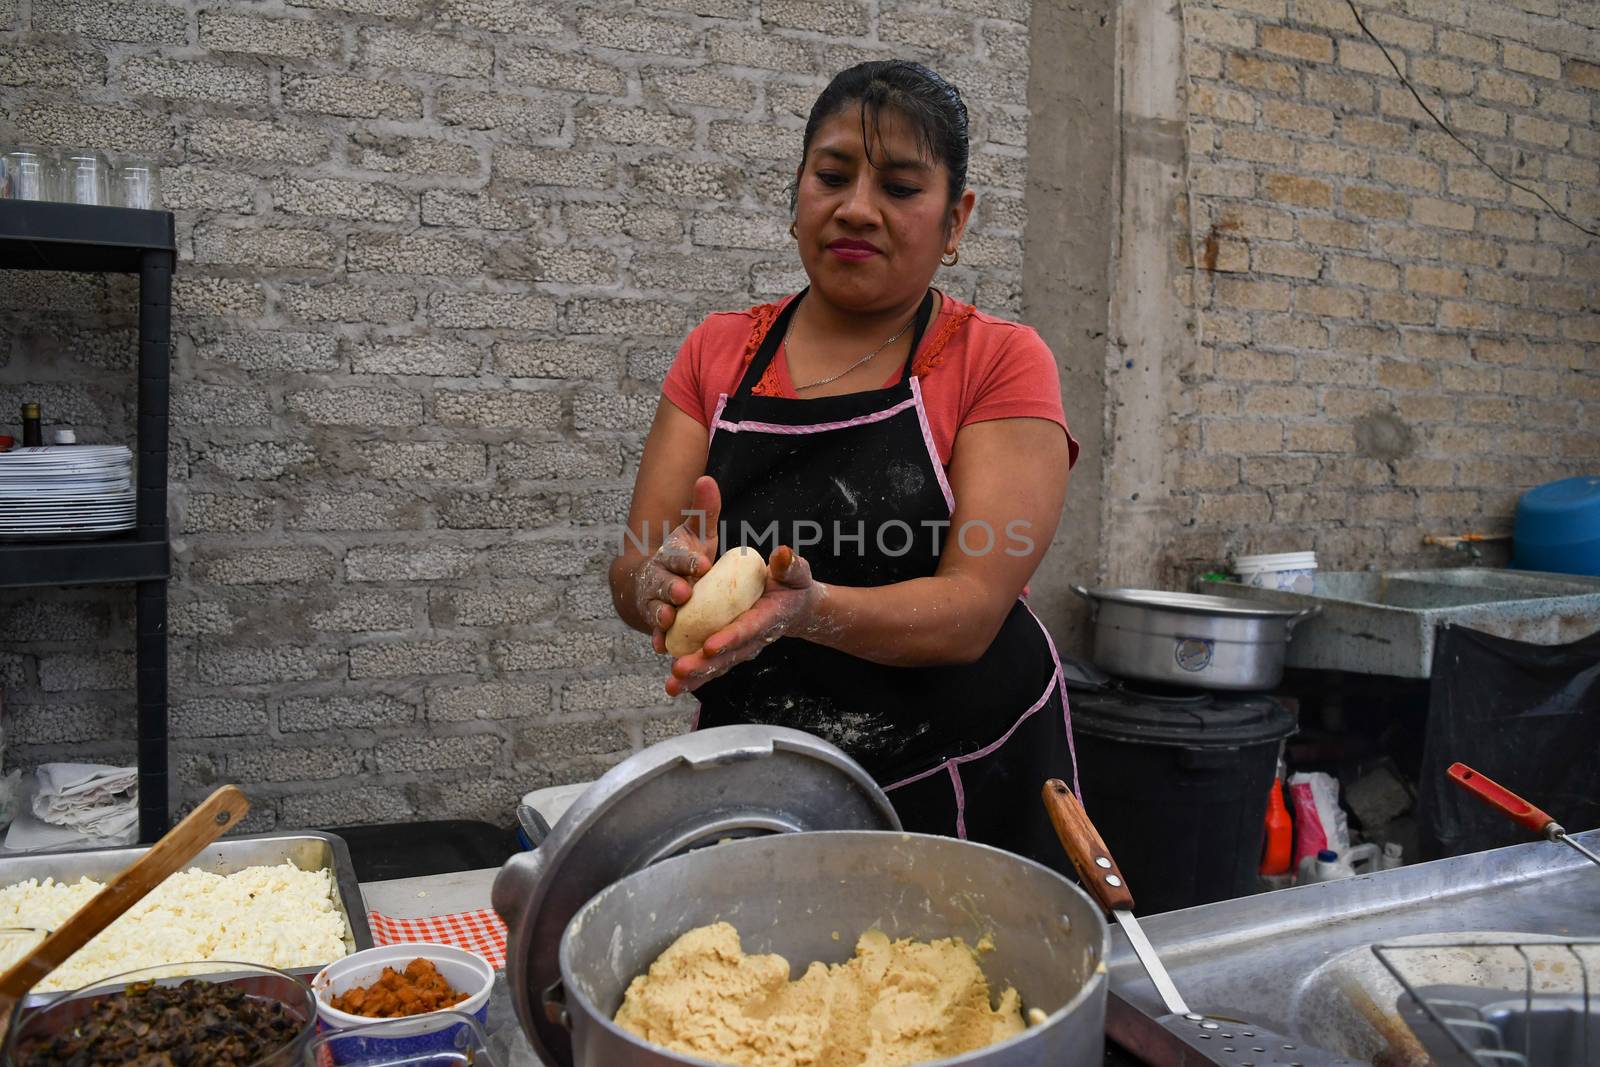 Old woman preparing a typical mexican food with her own hands